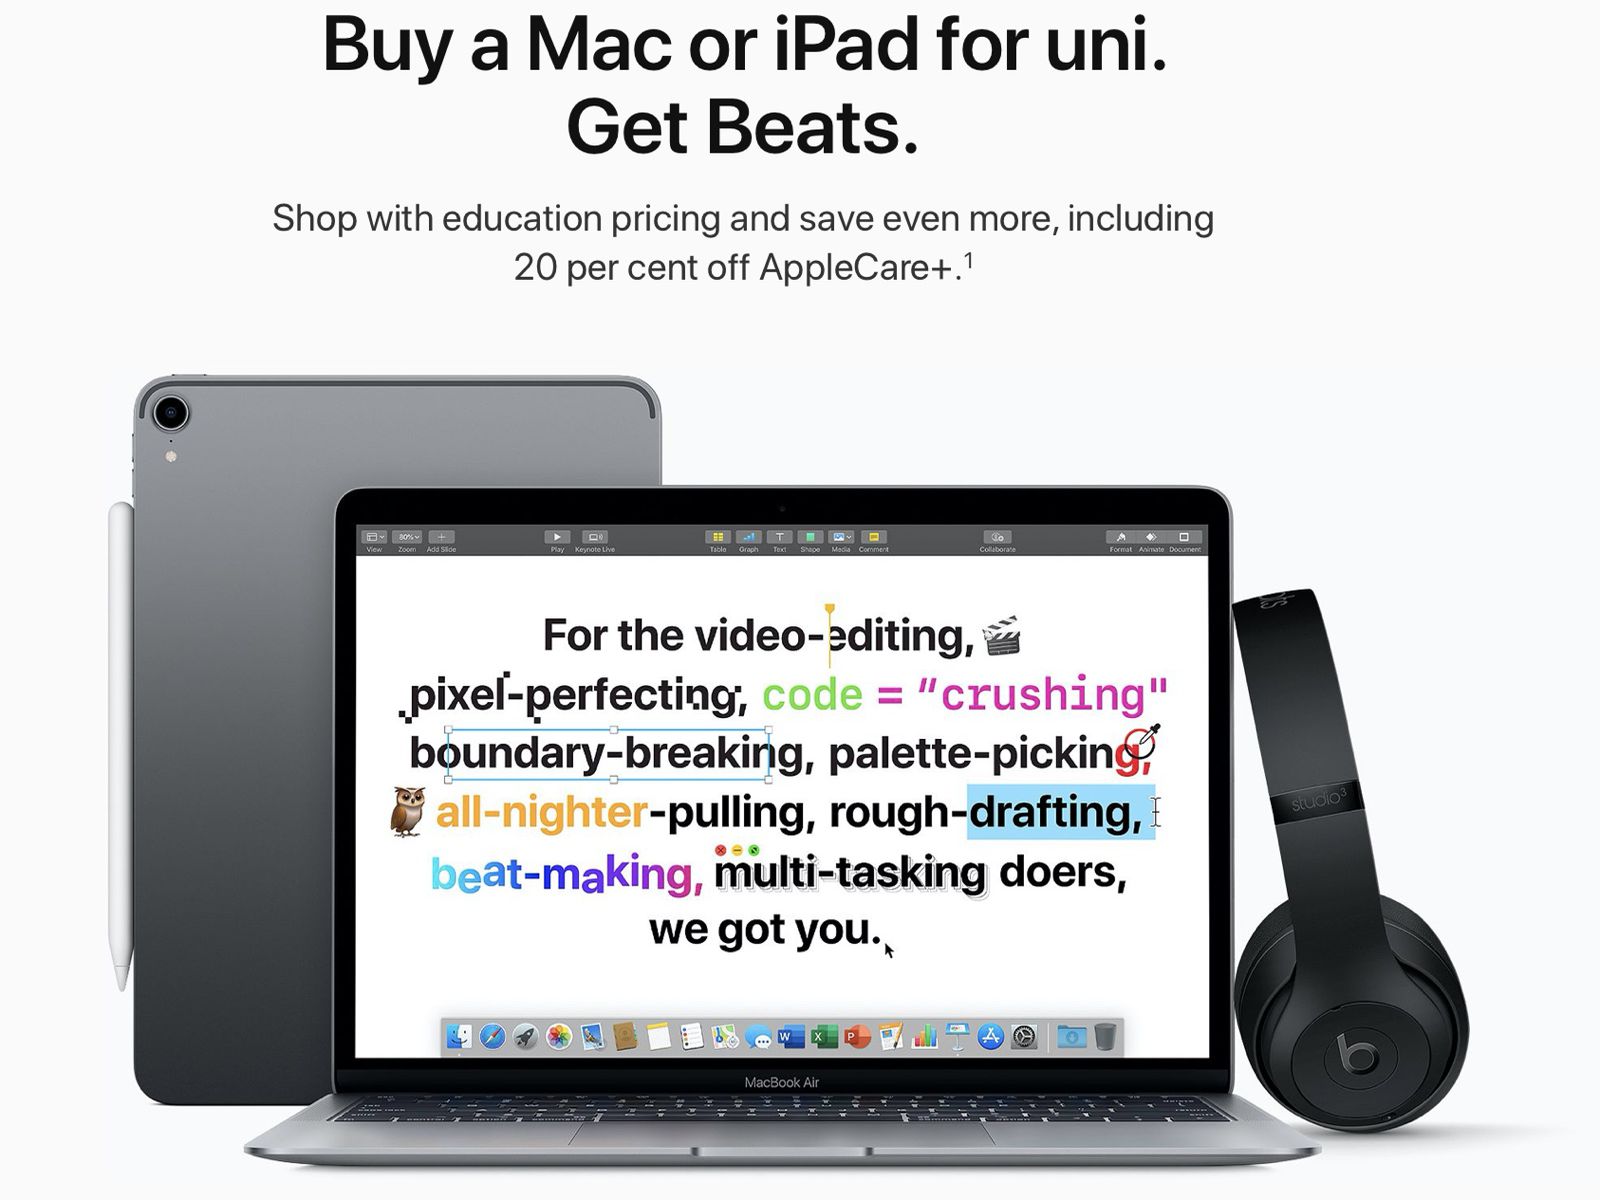 does best buy offer apple student discount